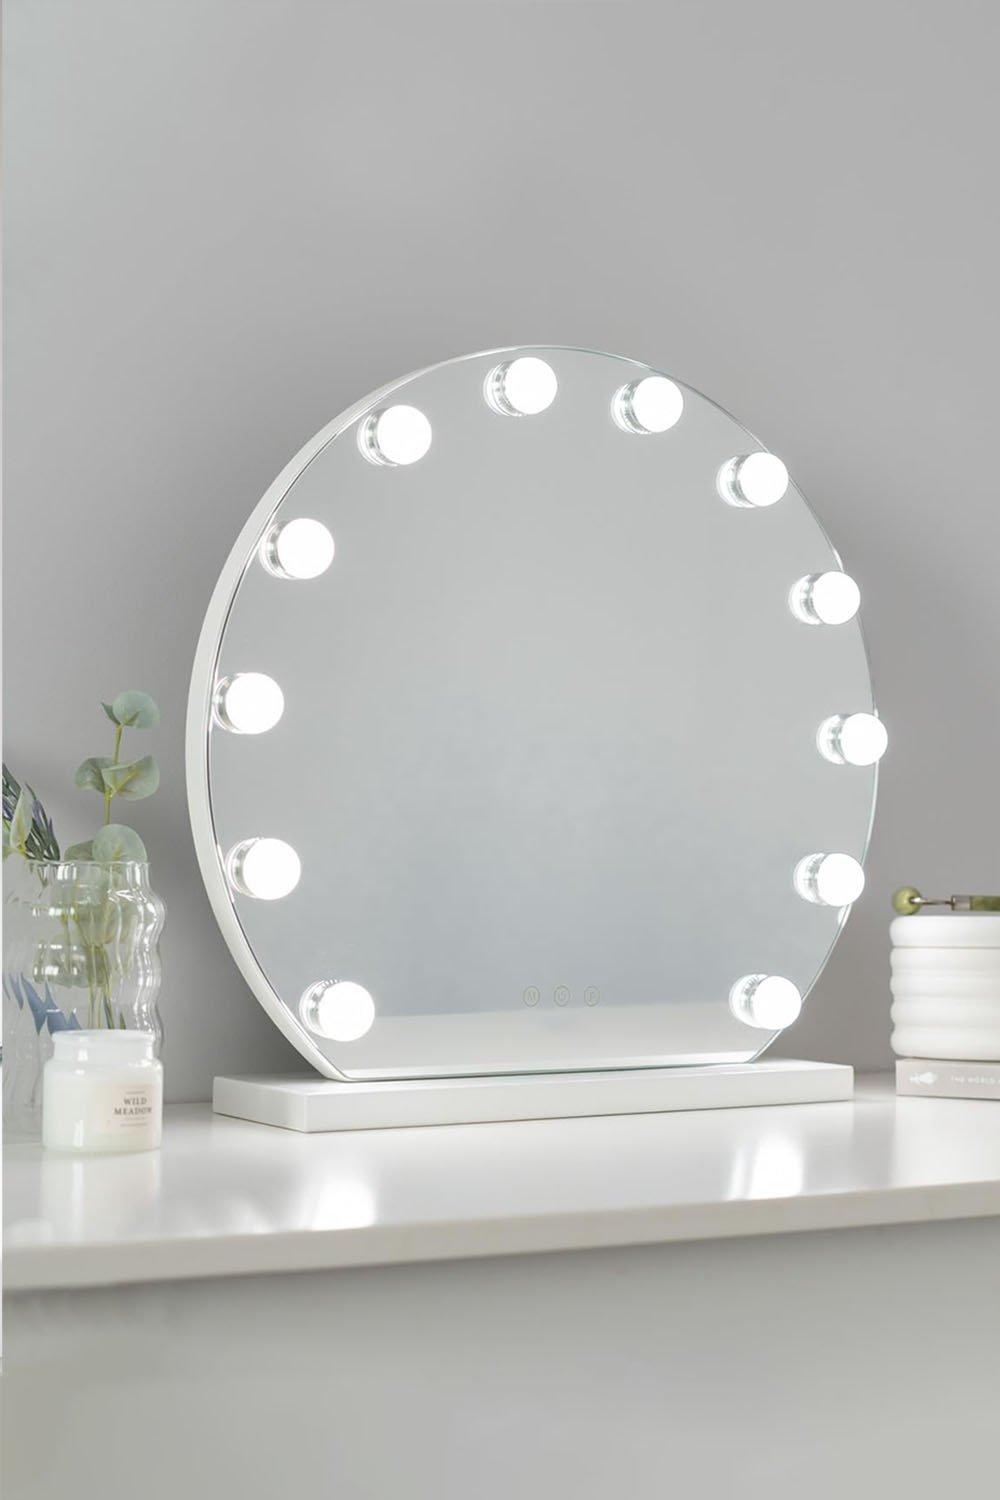 Metal Round Hollywood Vanity Mirror with 3 Color LED Lights,50cm* 45cm H